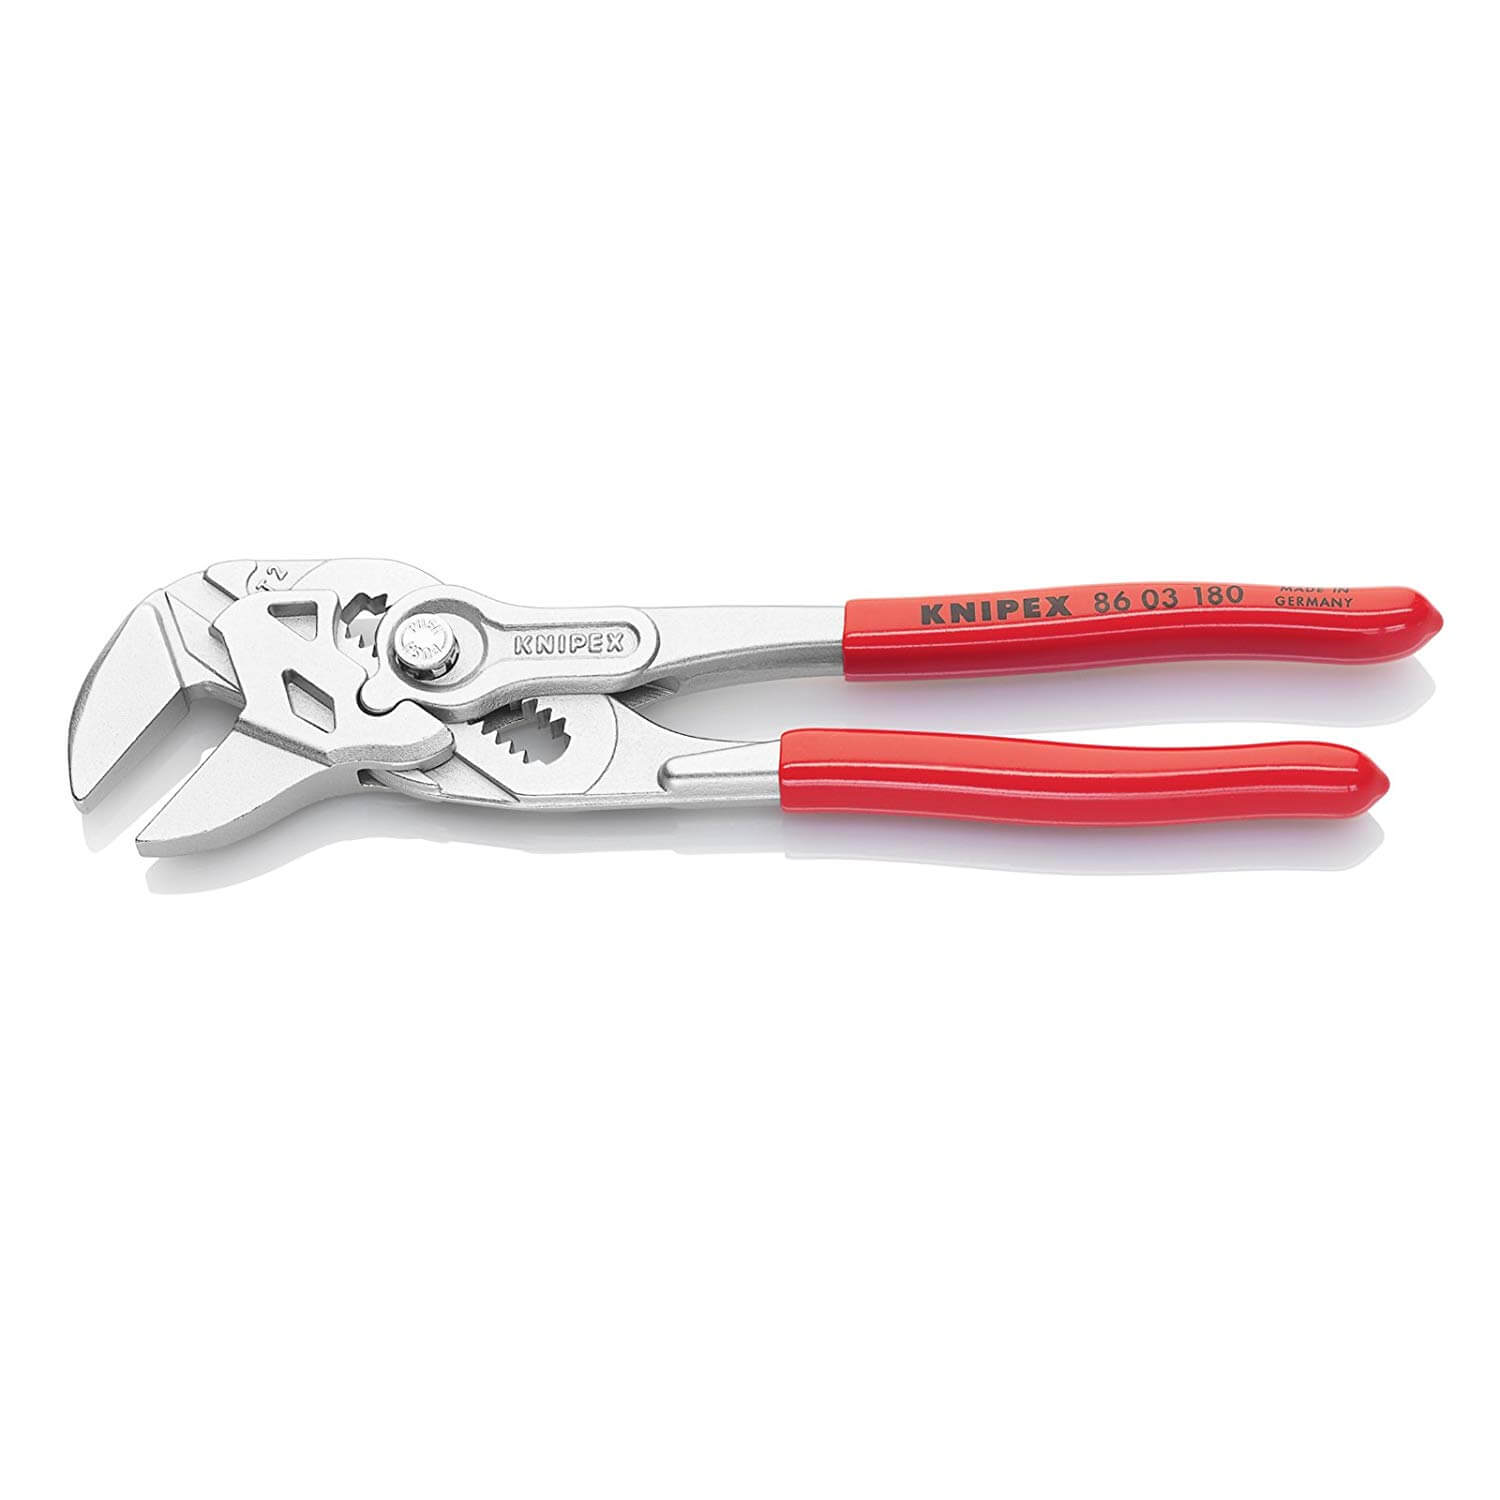 Knipex 8603180 - 7-1/4" Pliers Wrench - wise-line-tools